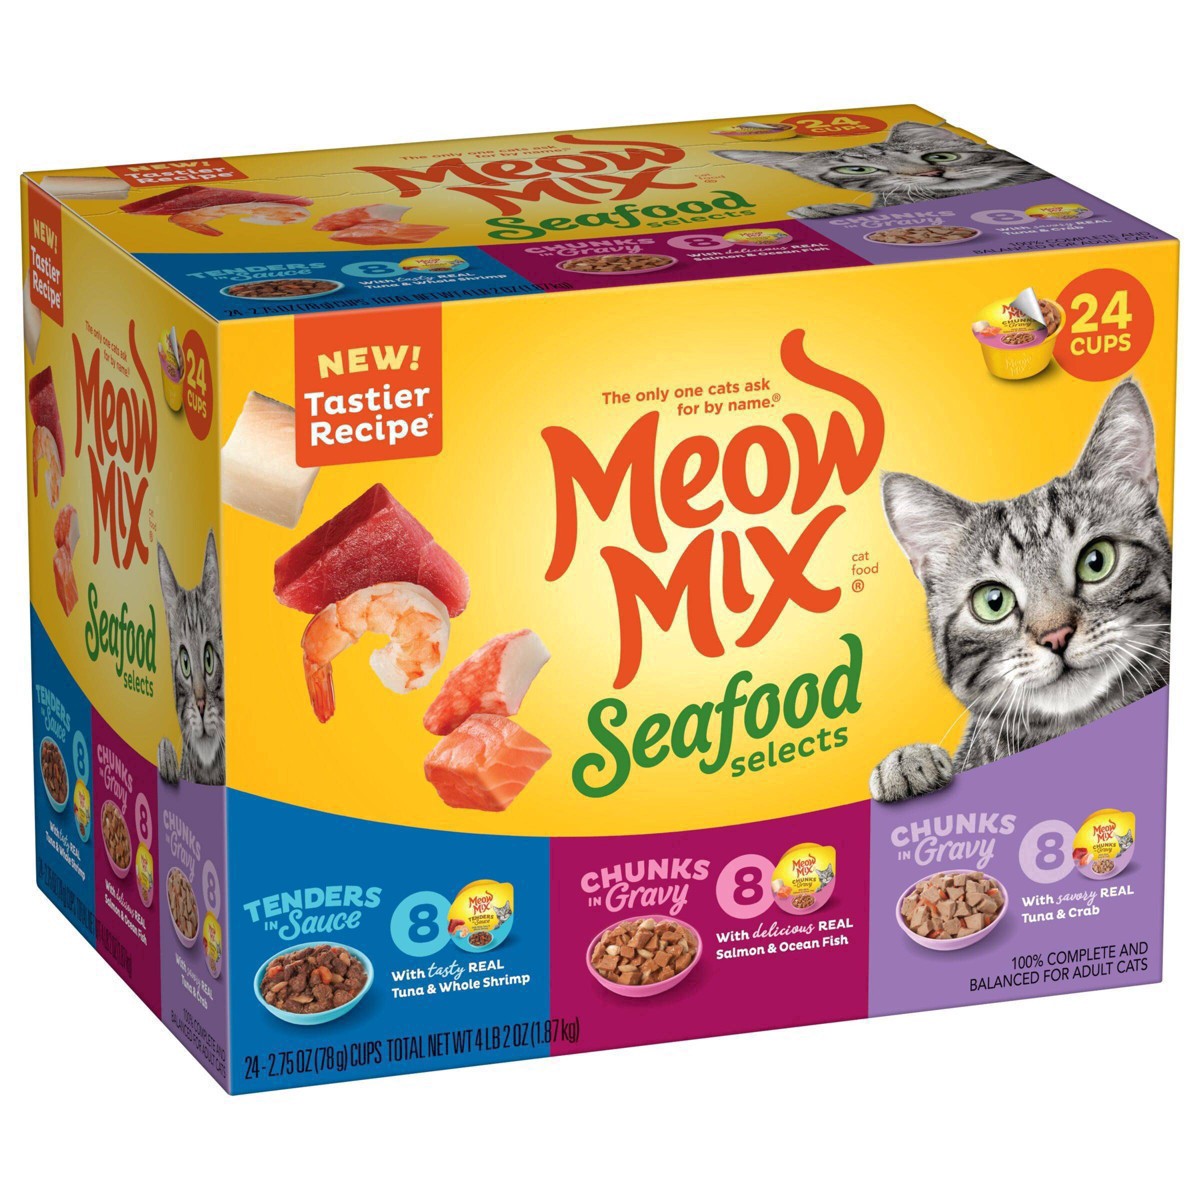 slide 11 of 27, Meow Mix Seafood Selects Wet Cat Food Variety Pack, 24 Cups, 2.75 Oz. Each (Packaging And Formulation Updates Underway), 24 ct